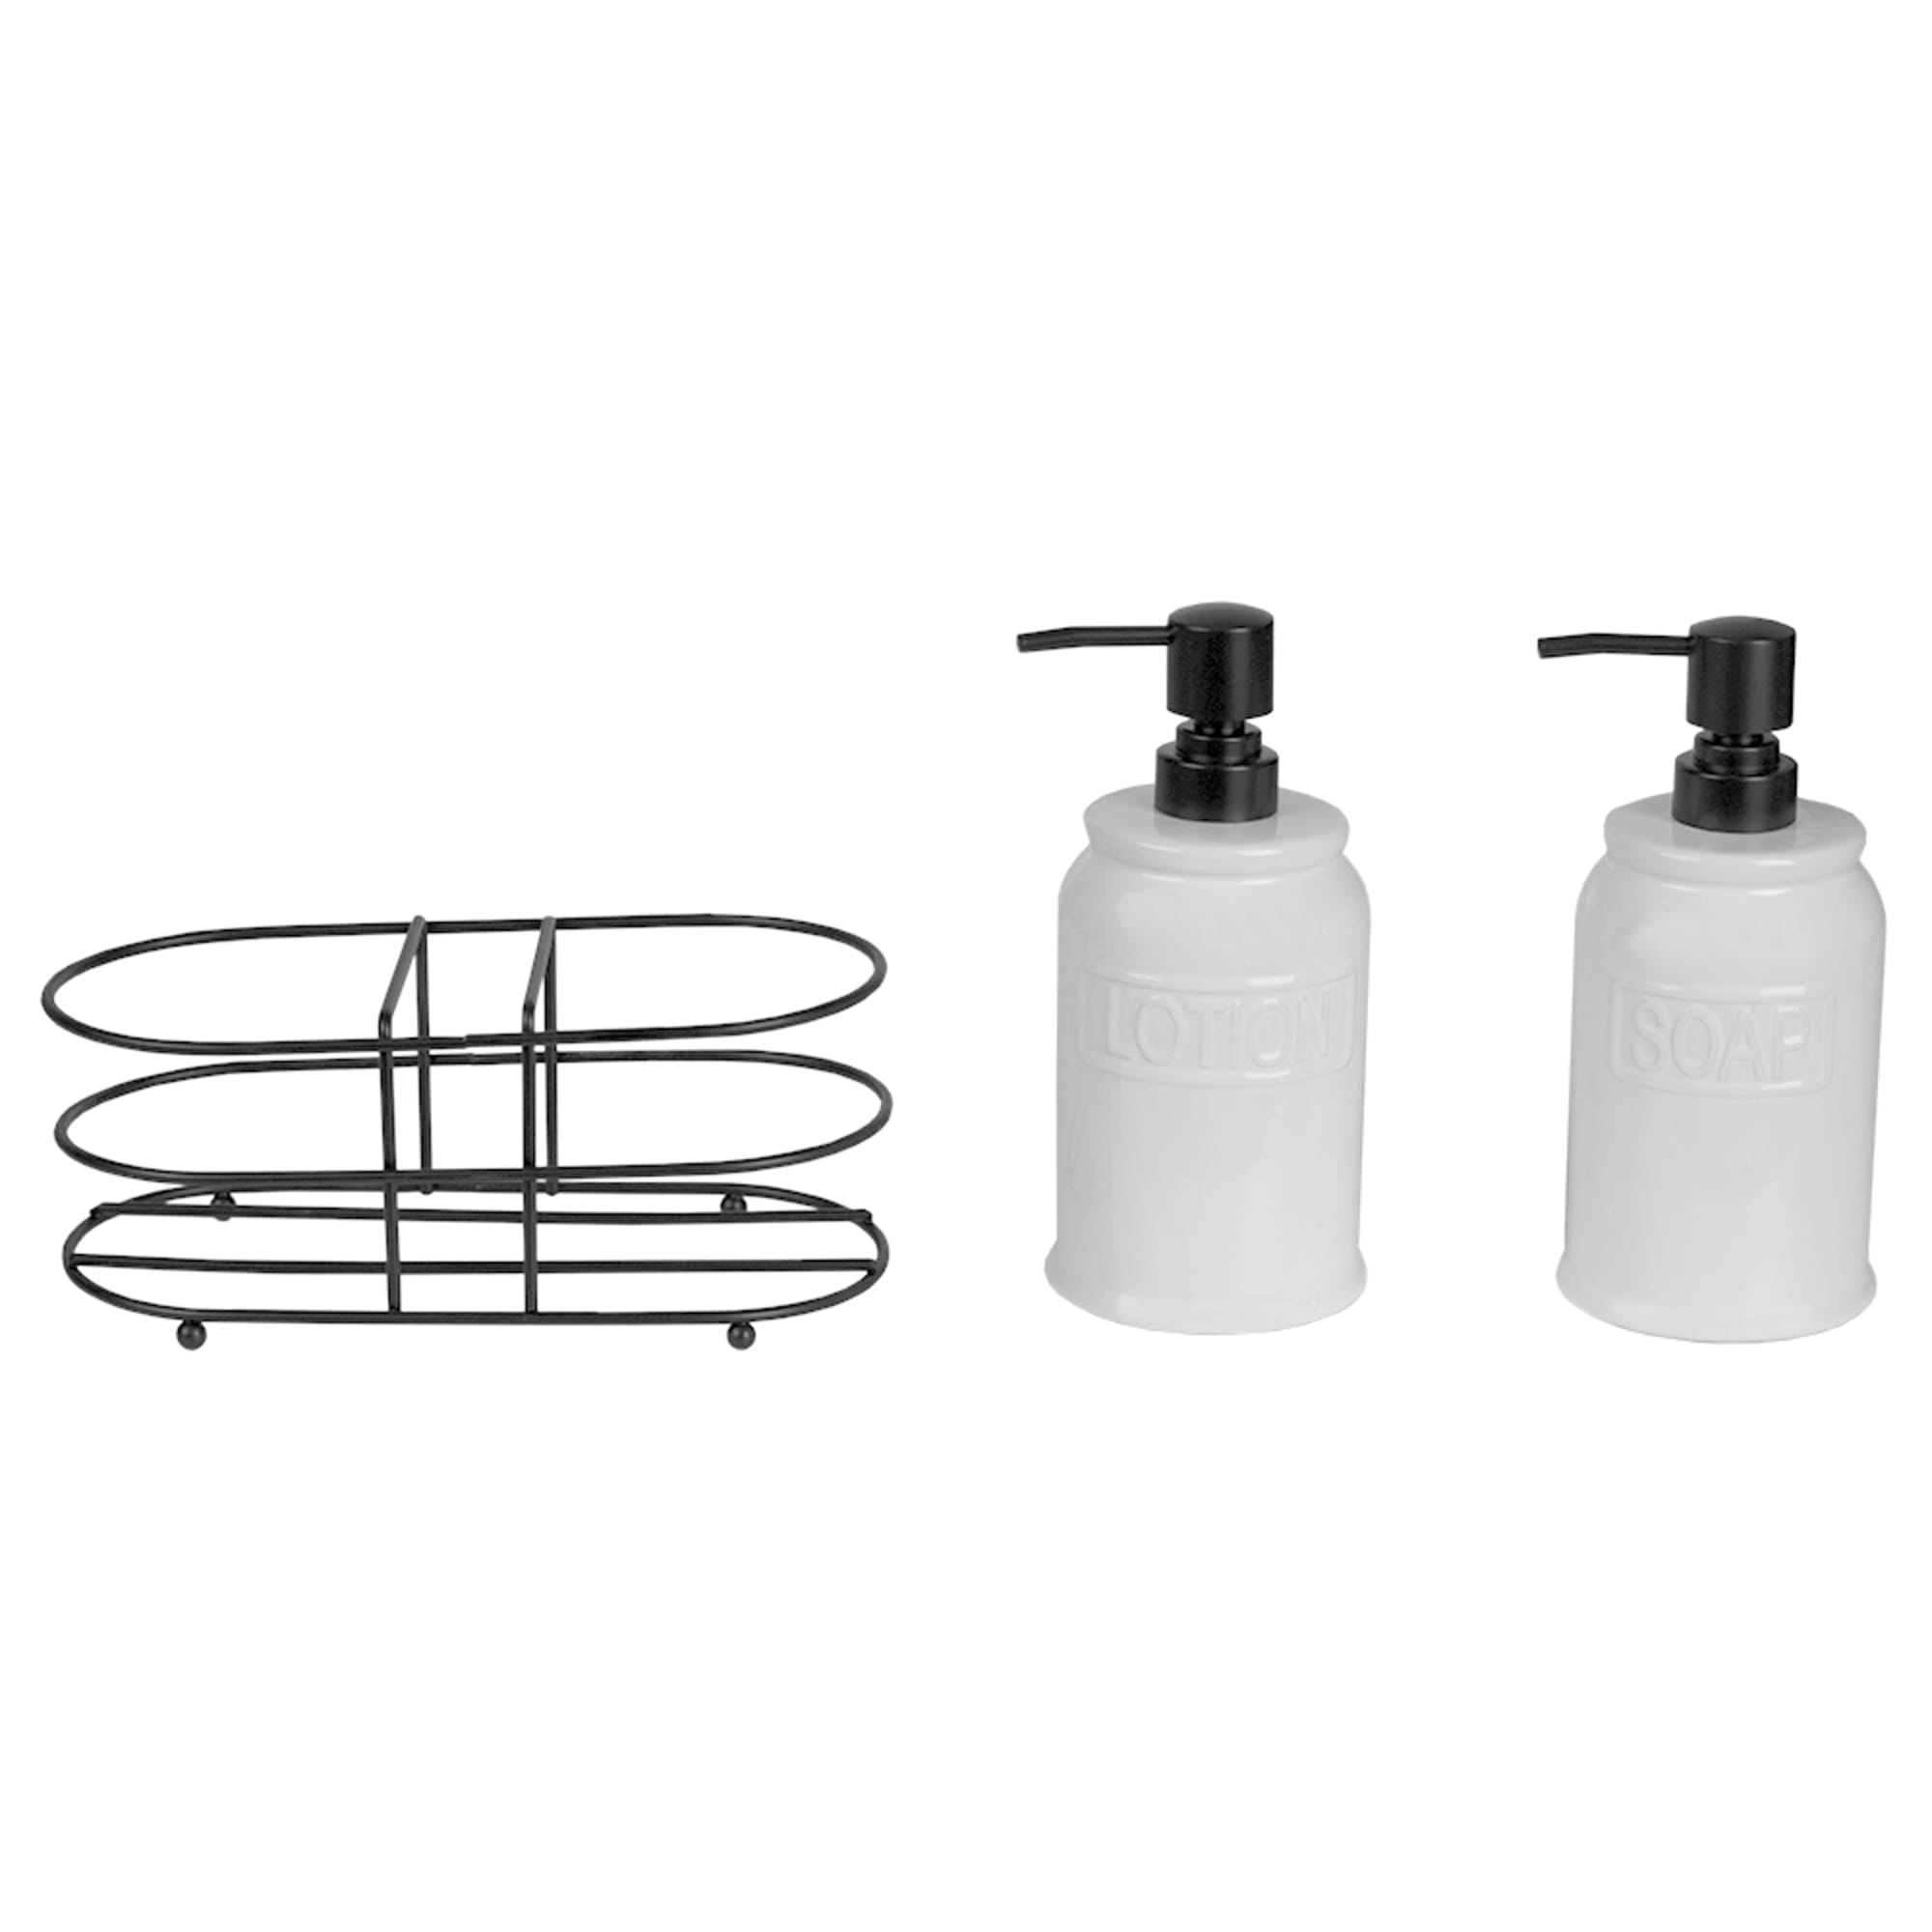 Home Basics 2 Piece Embossed Glazed Ceramic Soap Dispenser with Dual Compartment Metal Rack, White $10.00 EACH, CASE PACK OF 6